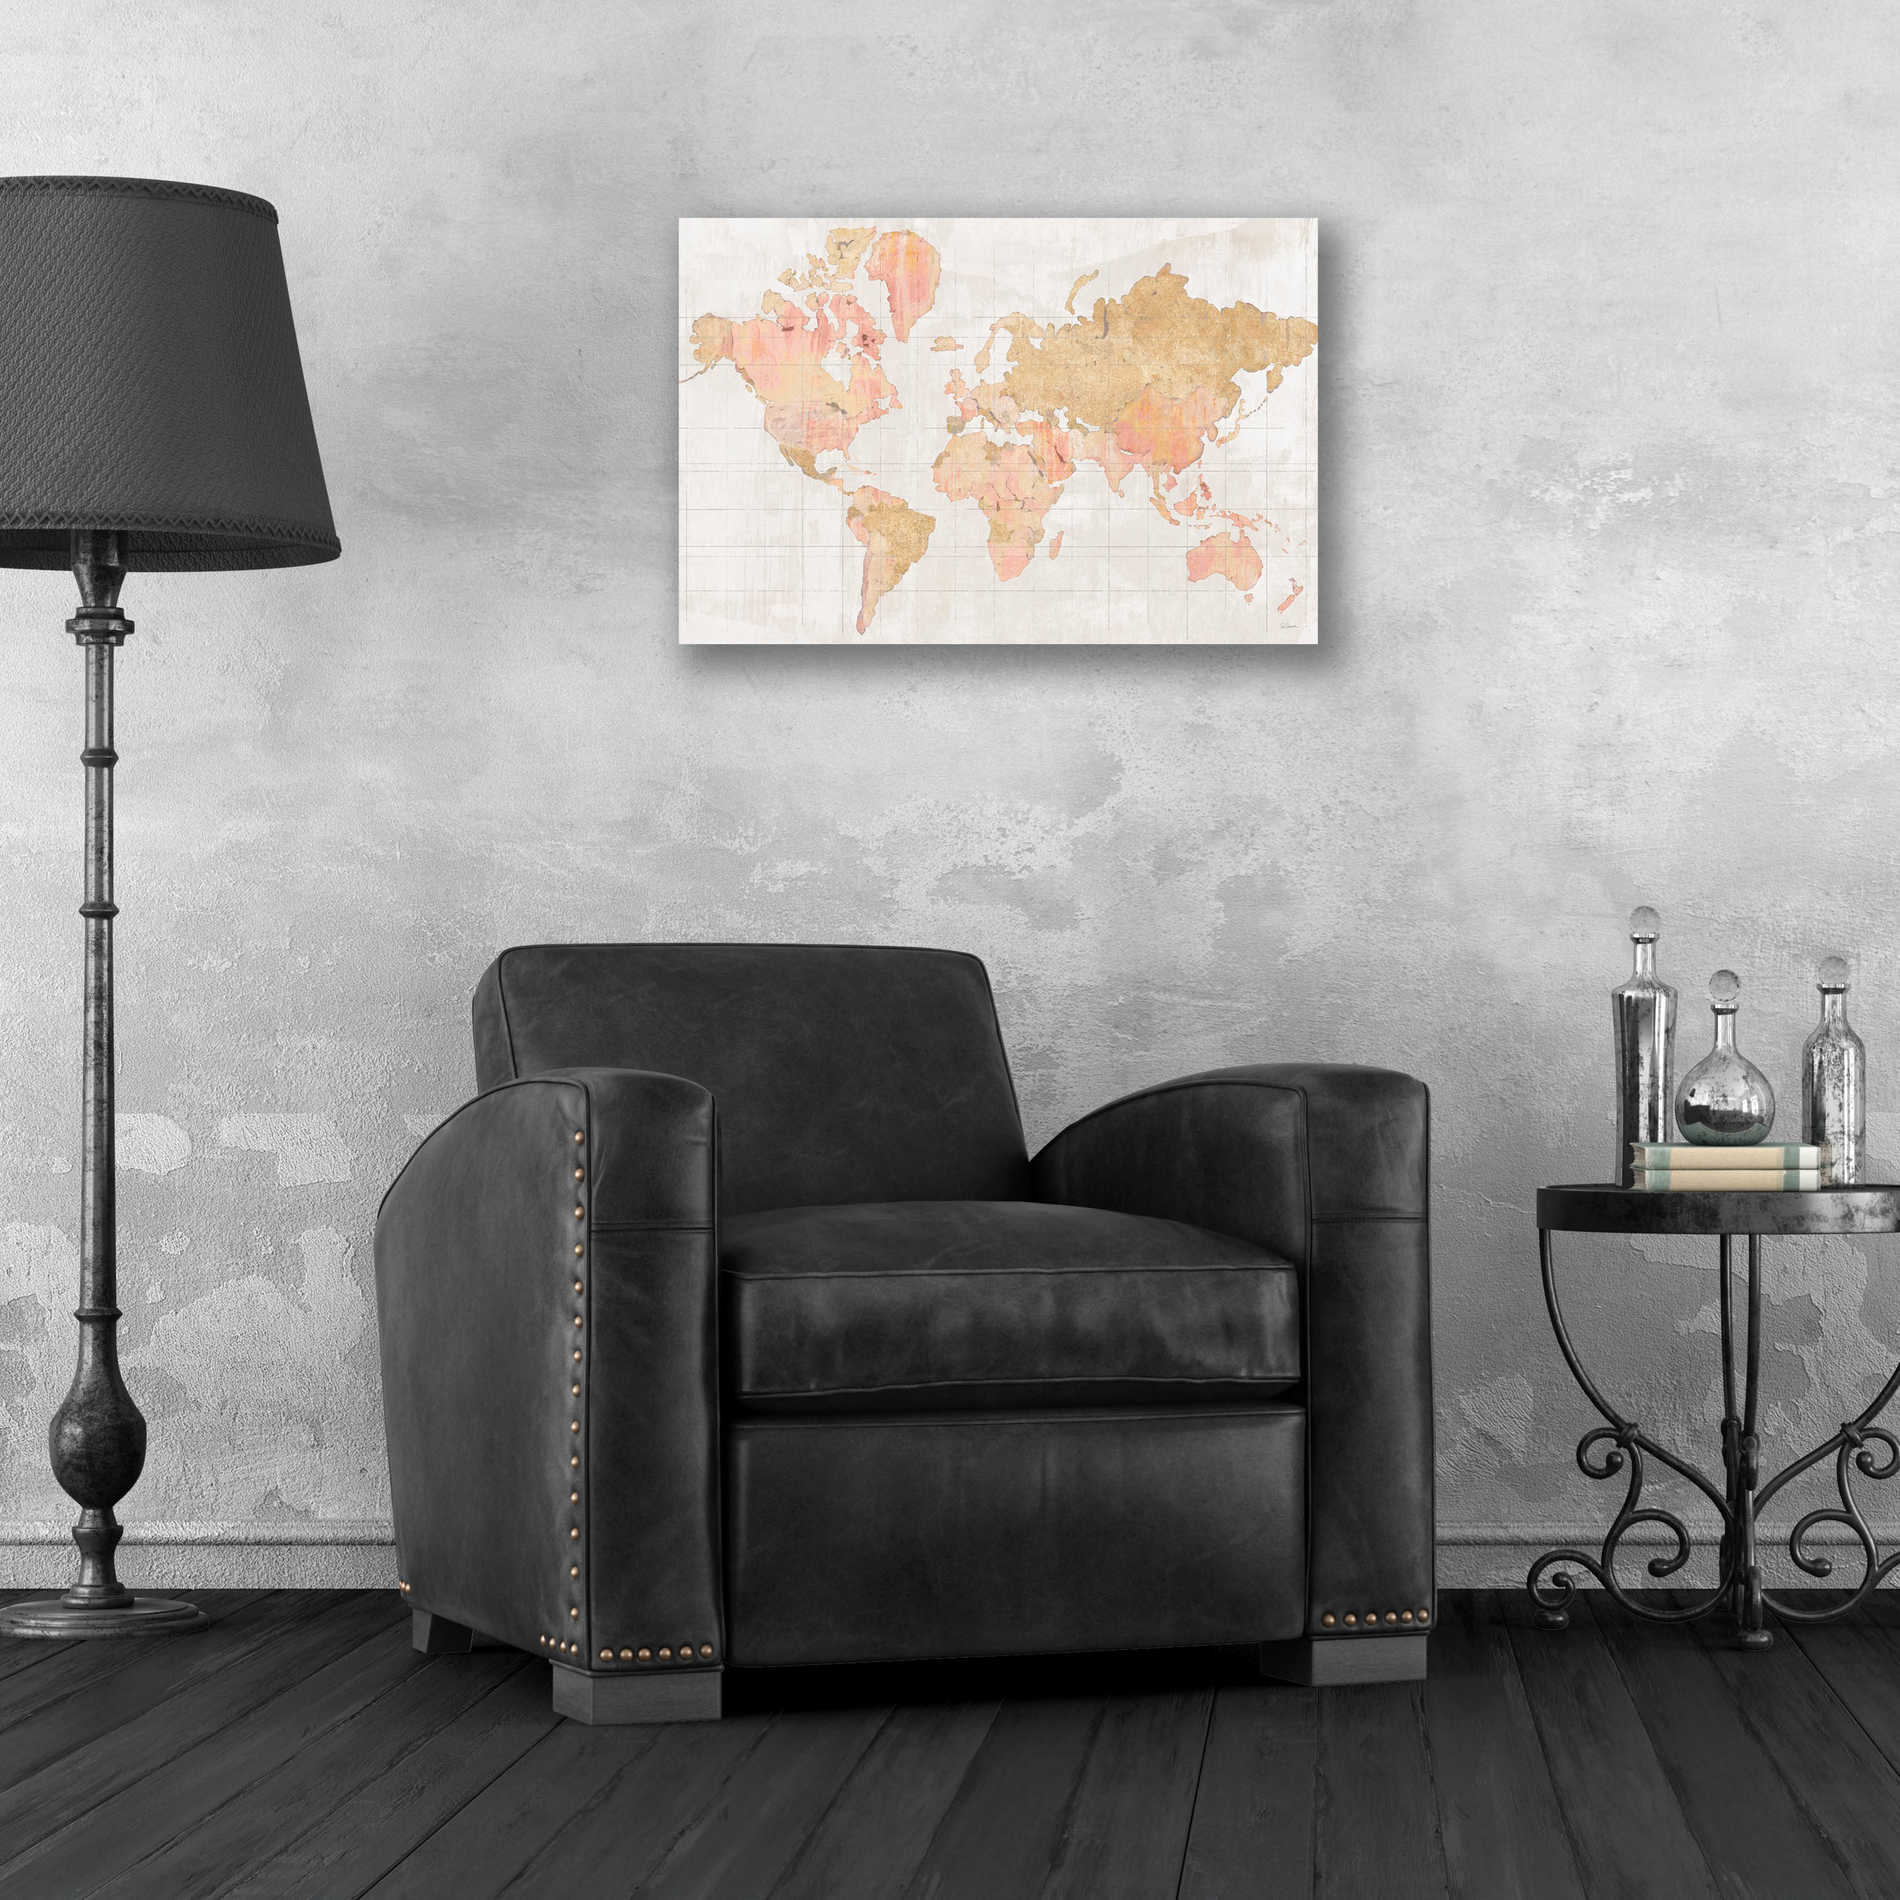 Epic Art 'Across the World Champagne' by Sue Schlabach, Acrylic Glass Wall Art,24x16